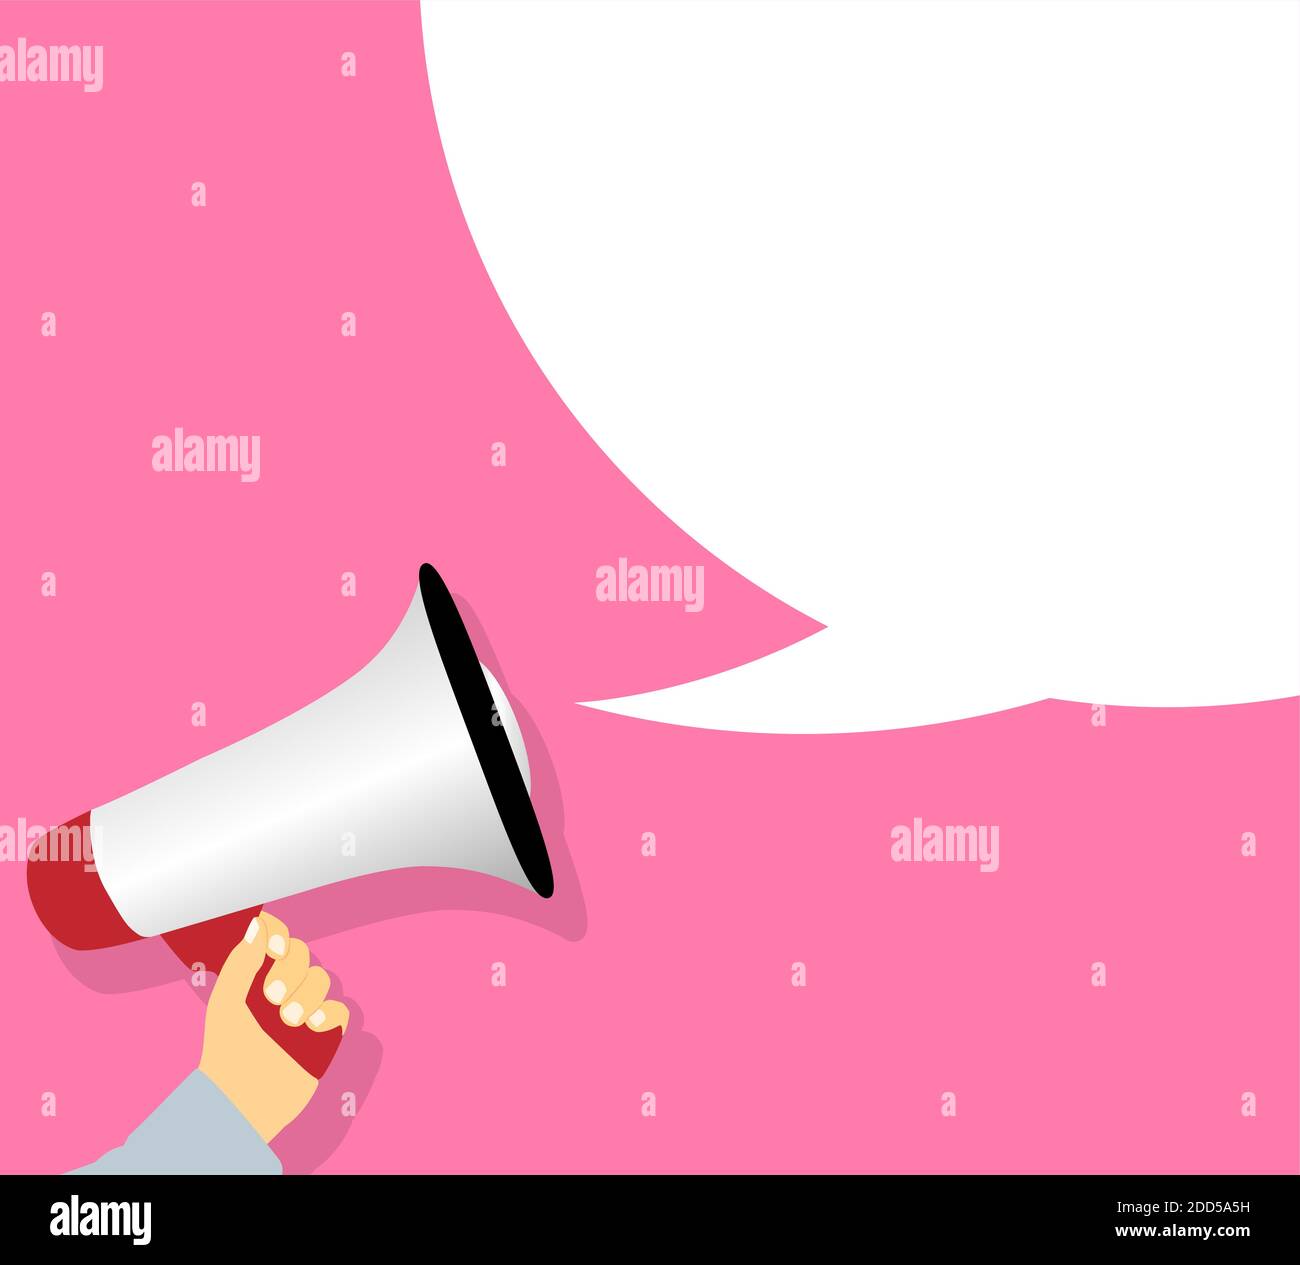 megaphone message template with speech bubble vector illustration Stock Vector